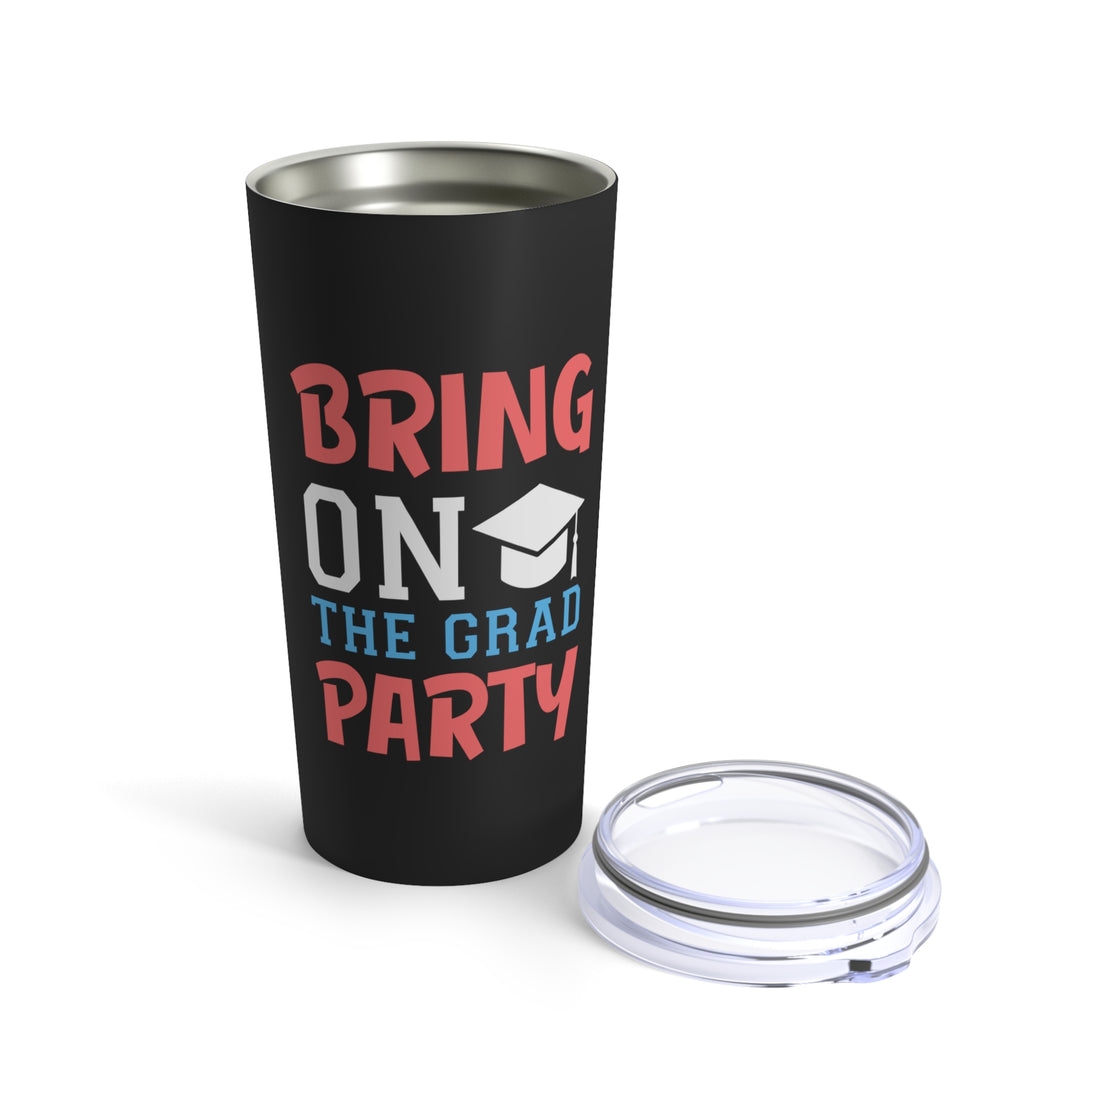 Bring On The Grad Party - Tumbler 20oz